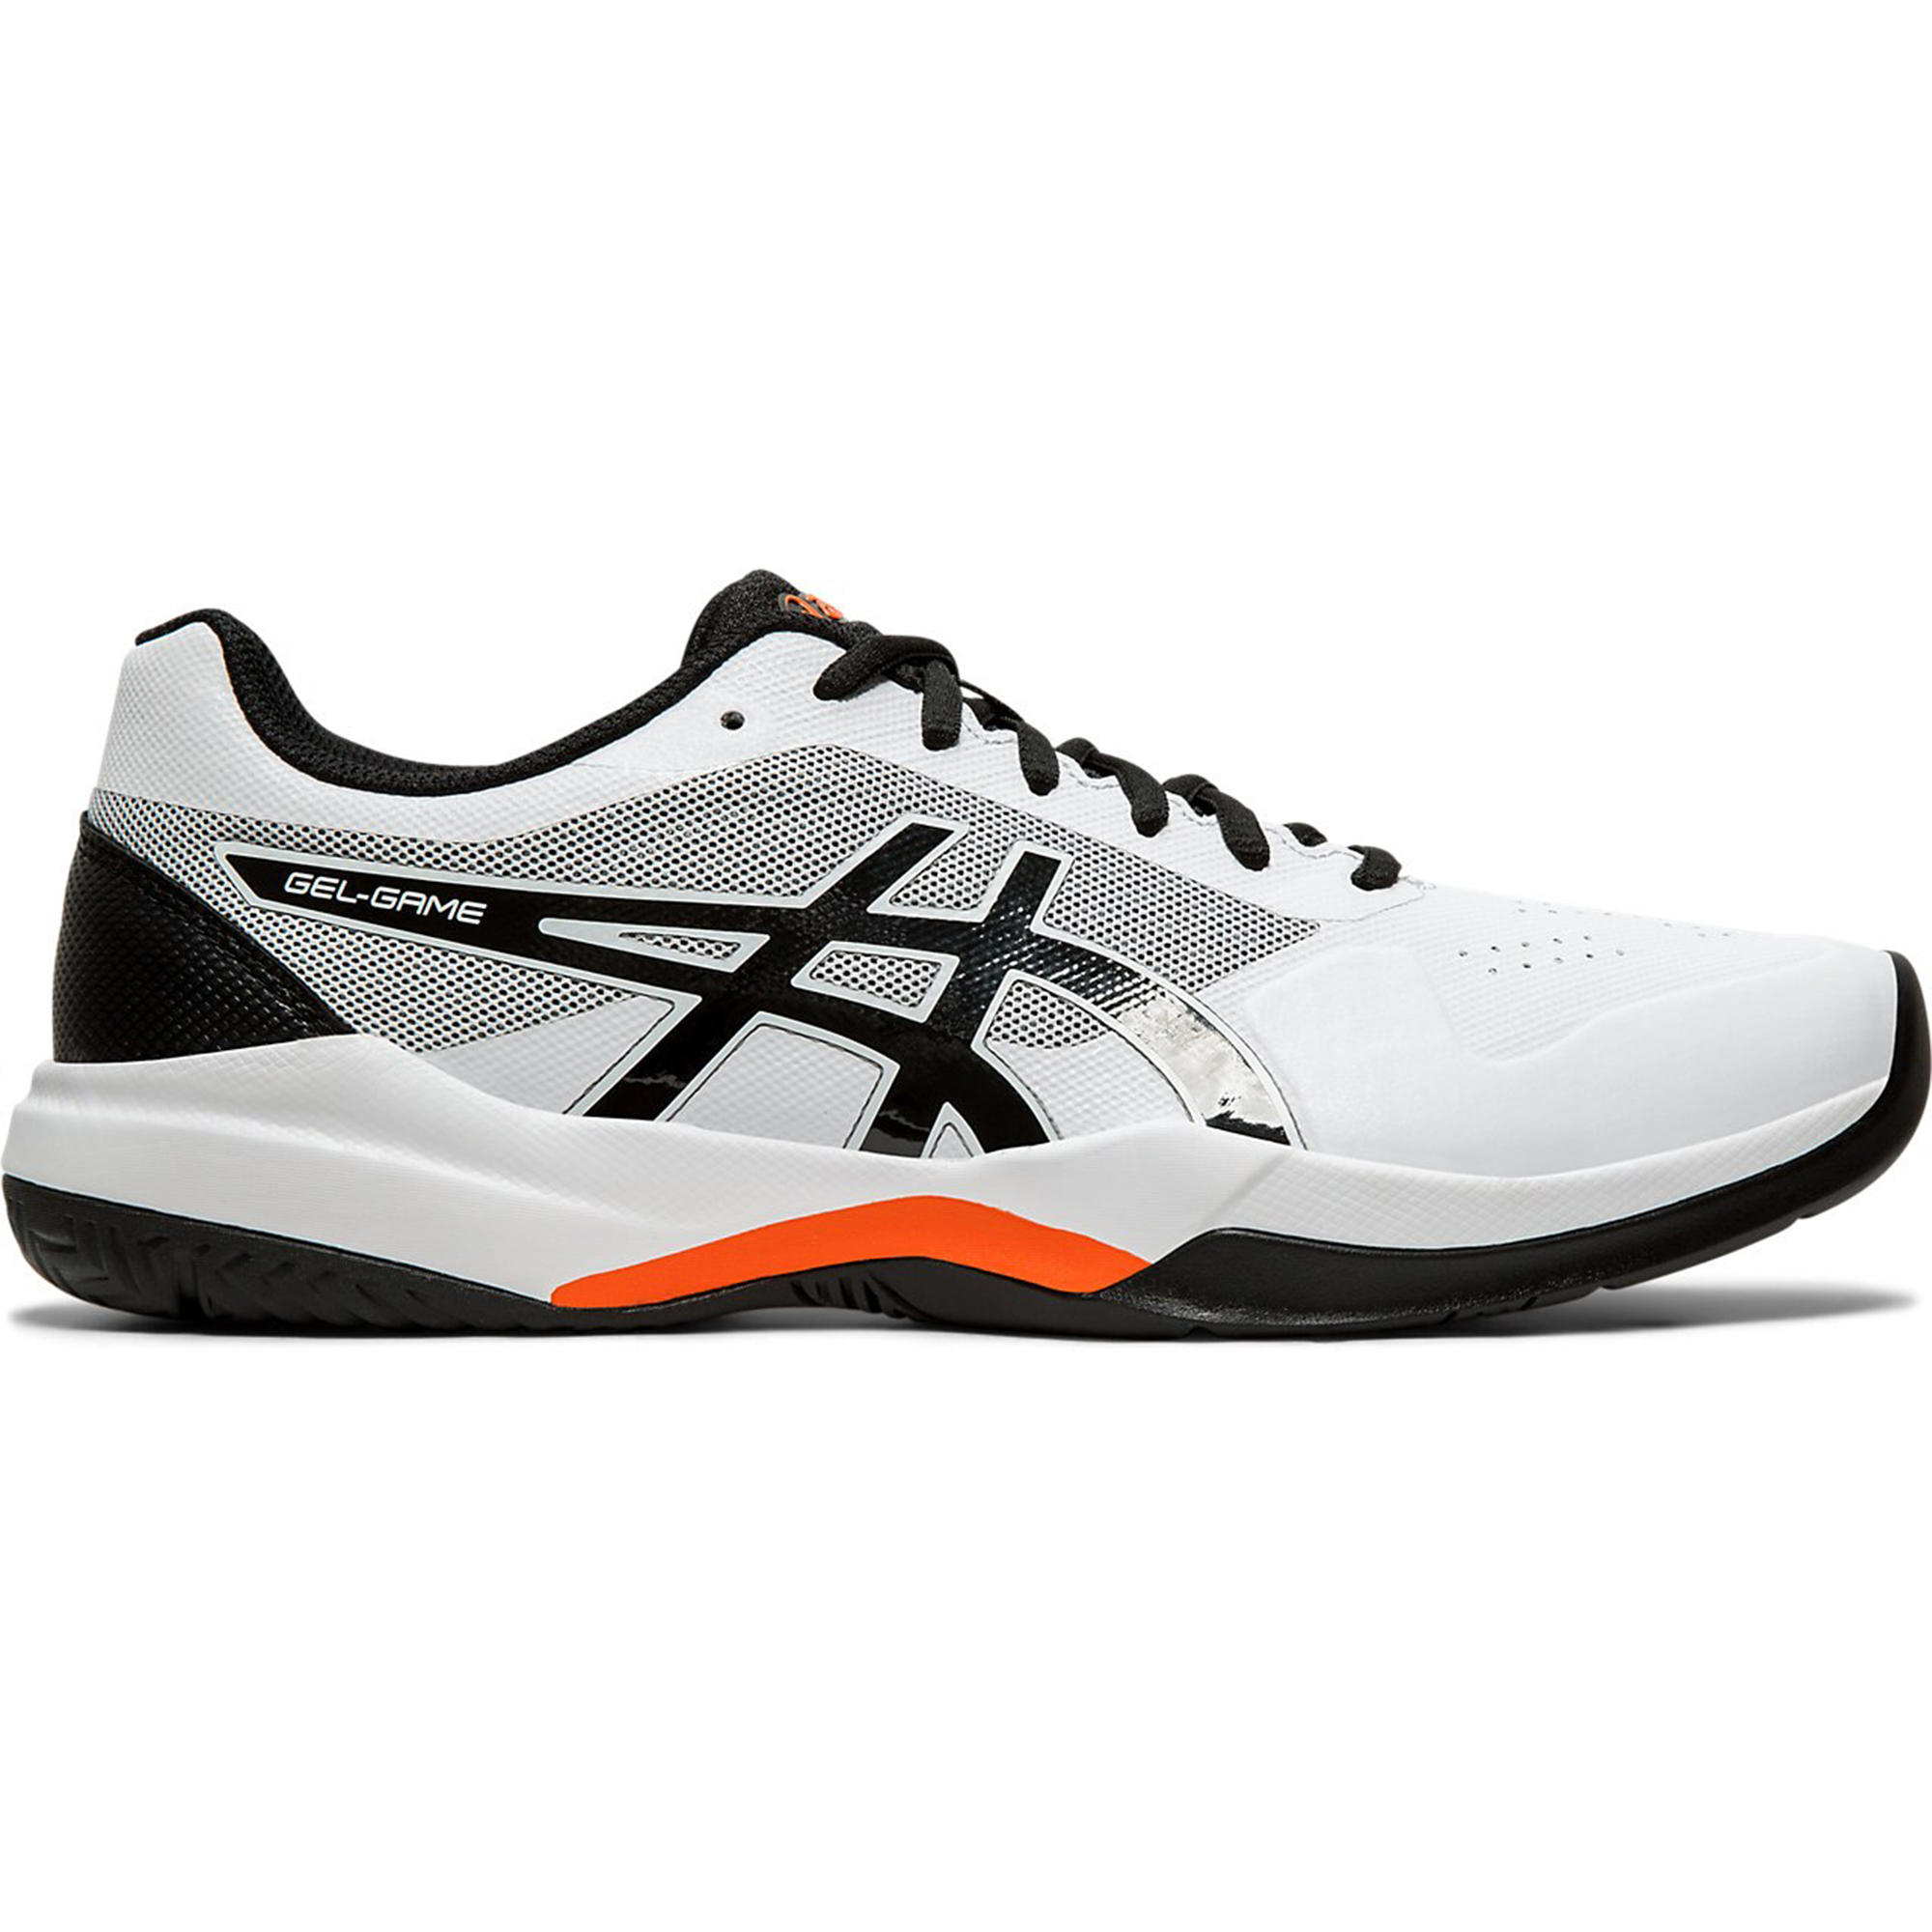 asics shoes for tennis